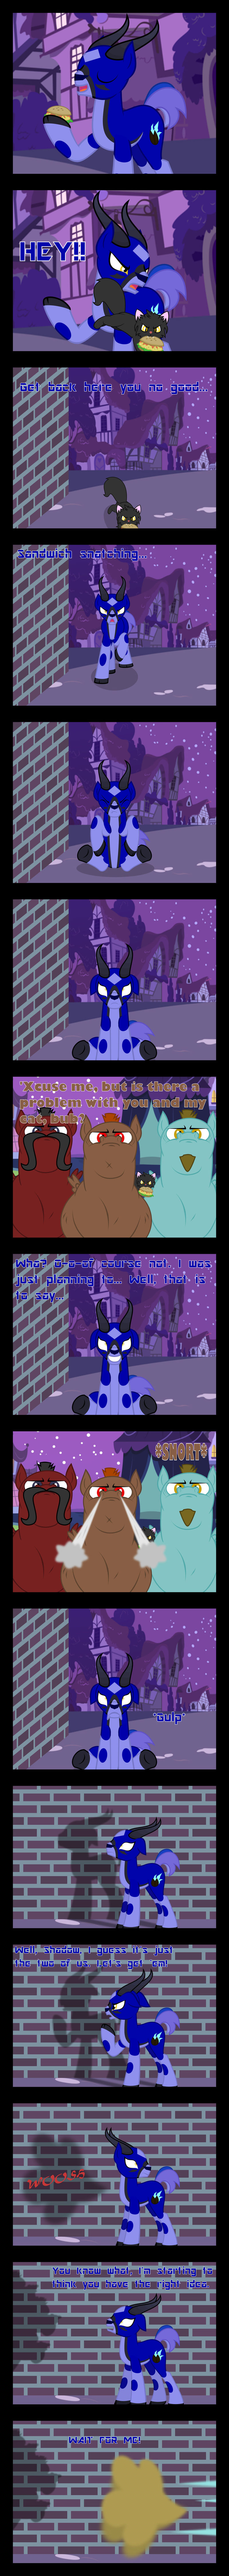 Page 3 - Bully For You